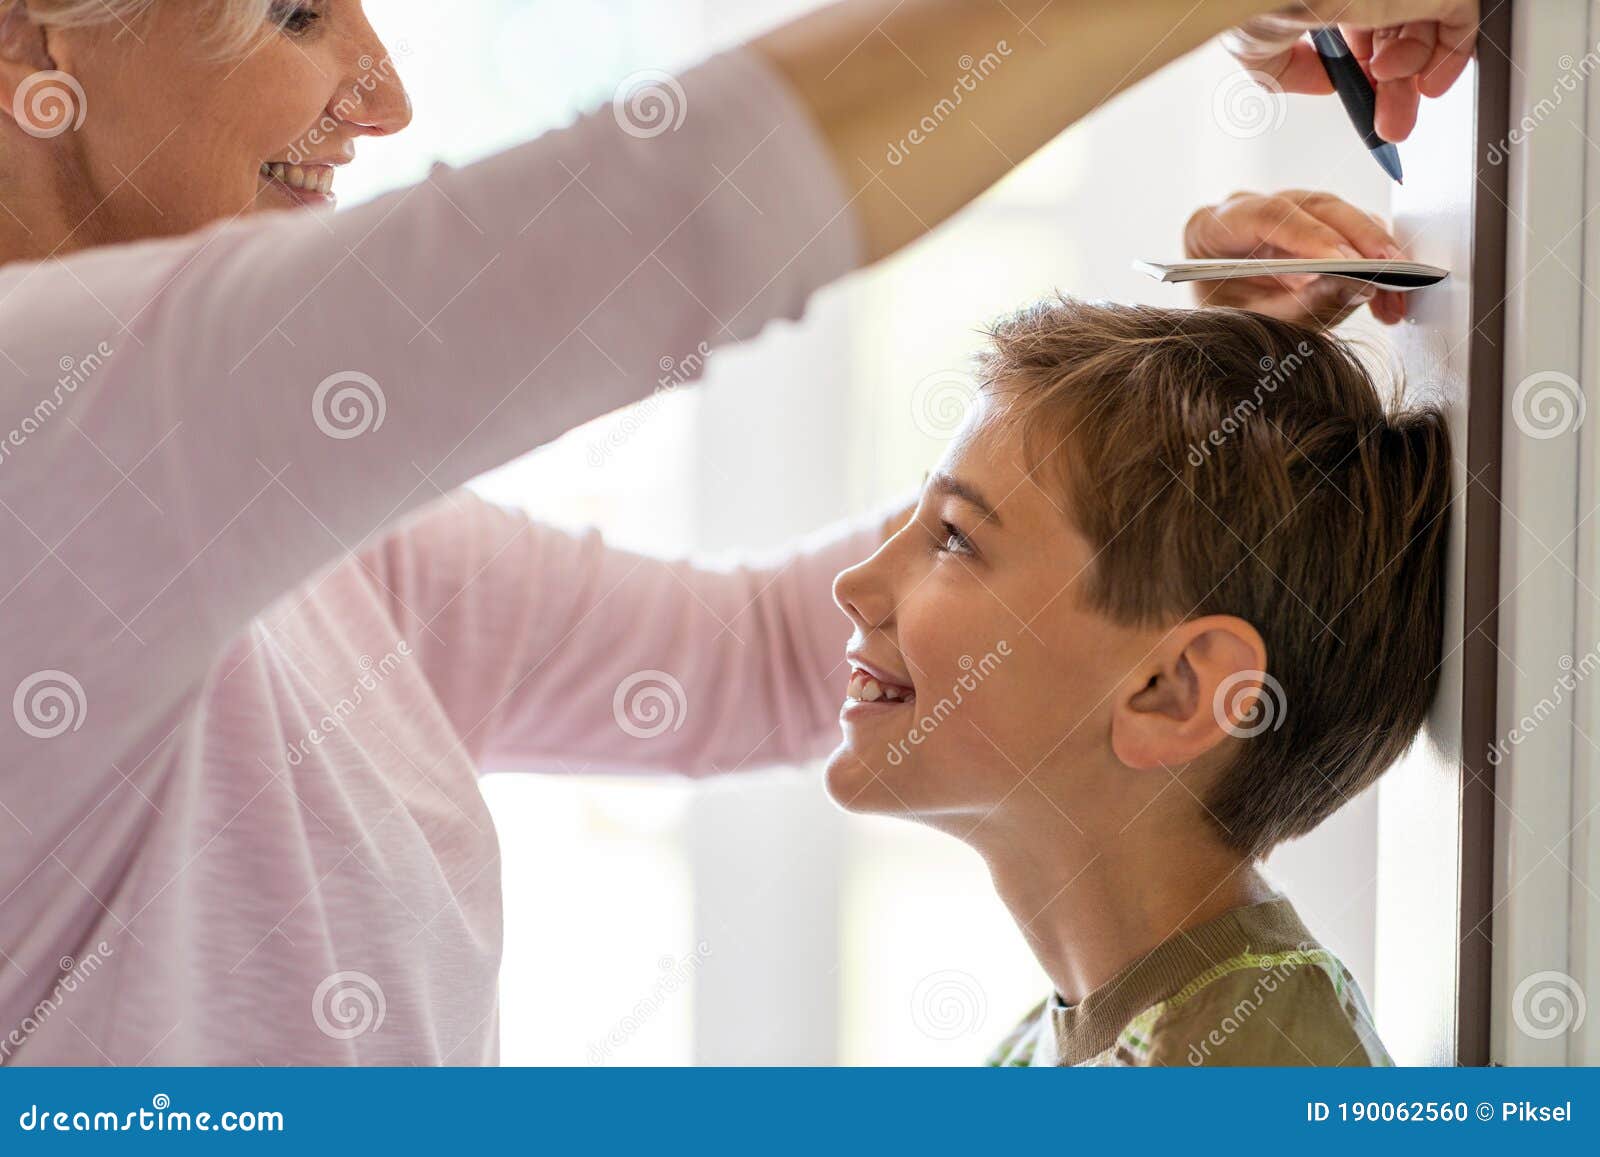 mother measuring the height of her son against wall